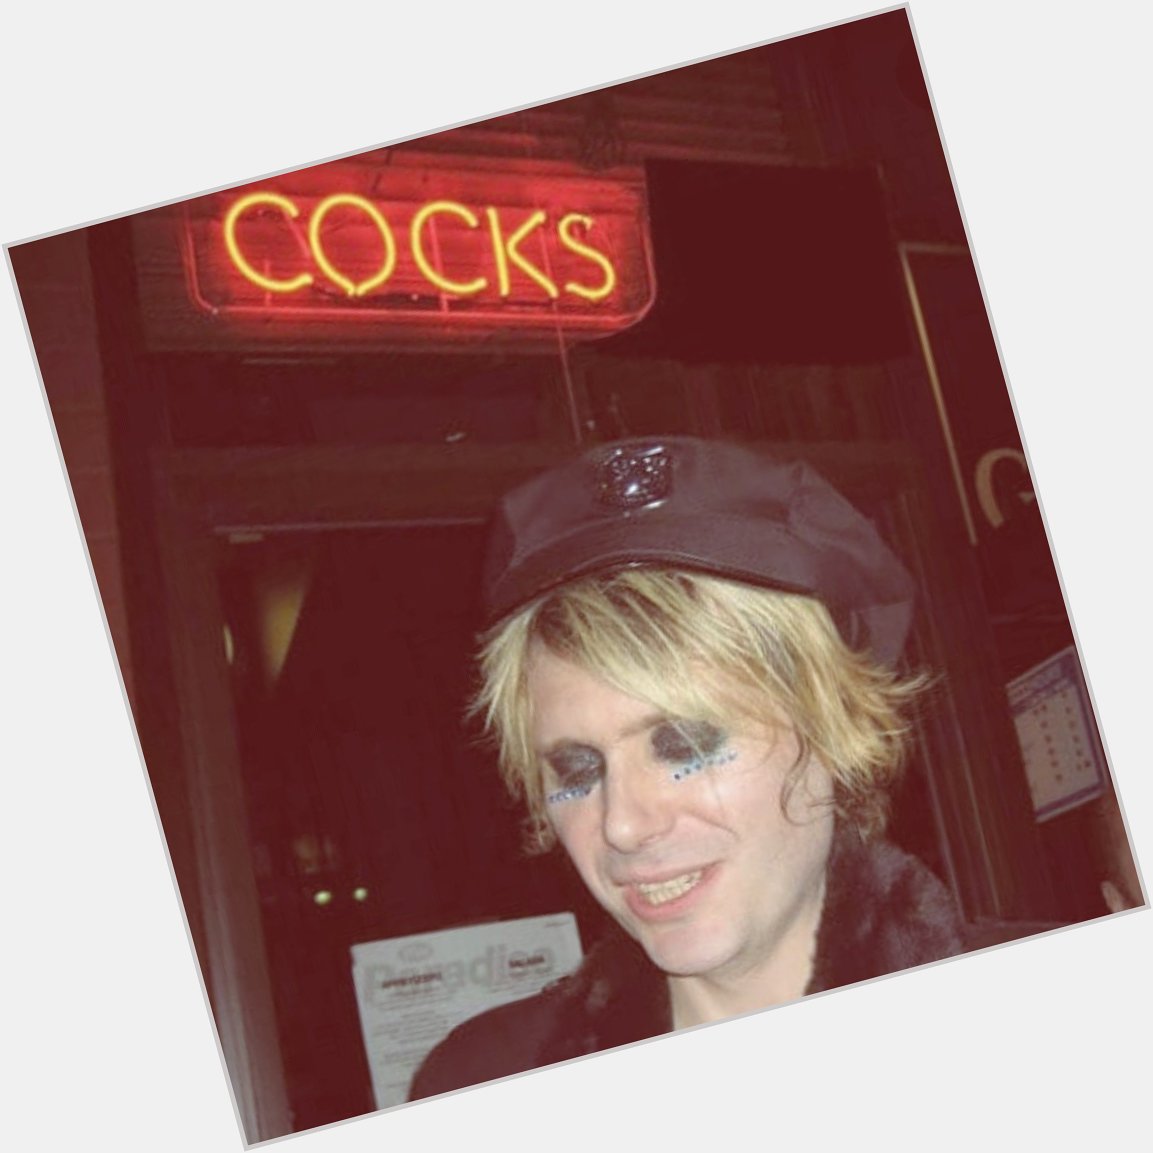 My two favourite things

Nicky wire and 

Cute hats

Happy Birthday u sexy old daddy xoxoxoxo 